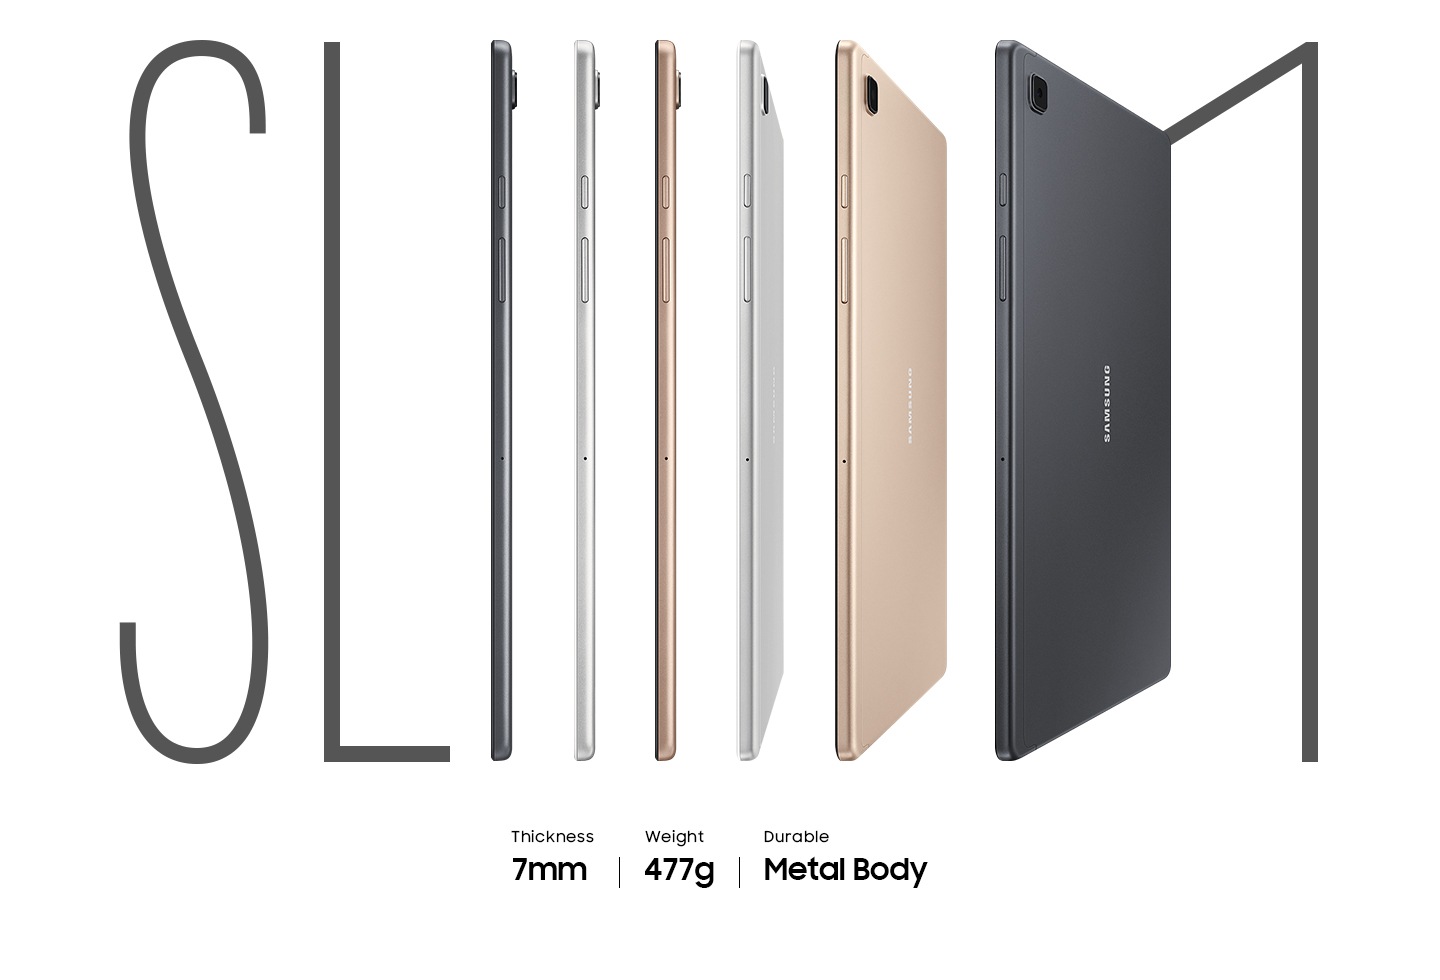 6 Galaxy Tab A7s stand side-by-side spelling out the word slim, demonstrating the tab’s slimness and light 477g weight.